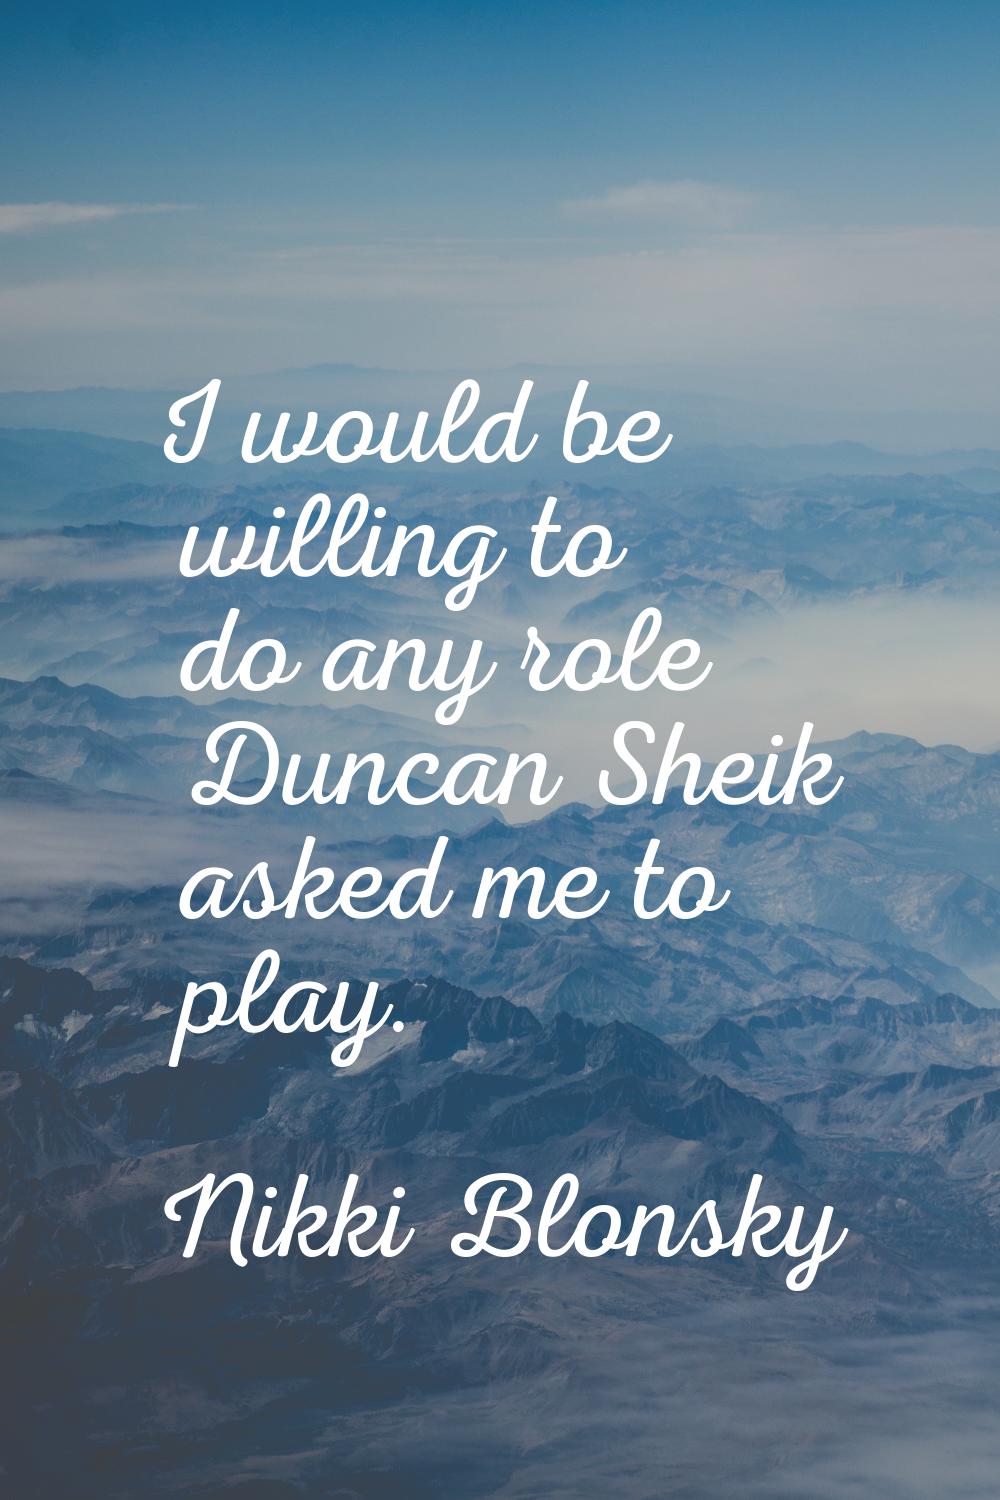 I would be willing to do any role Duncan Sheik asked me to play.